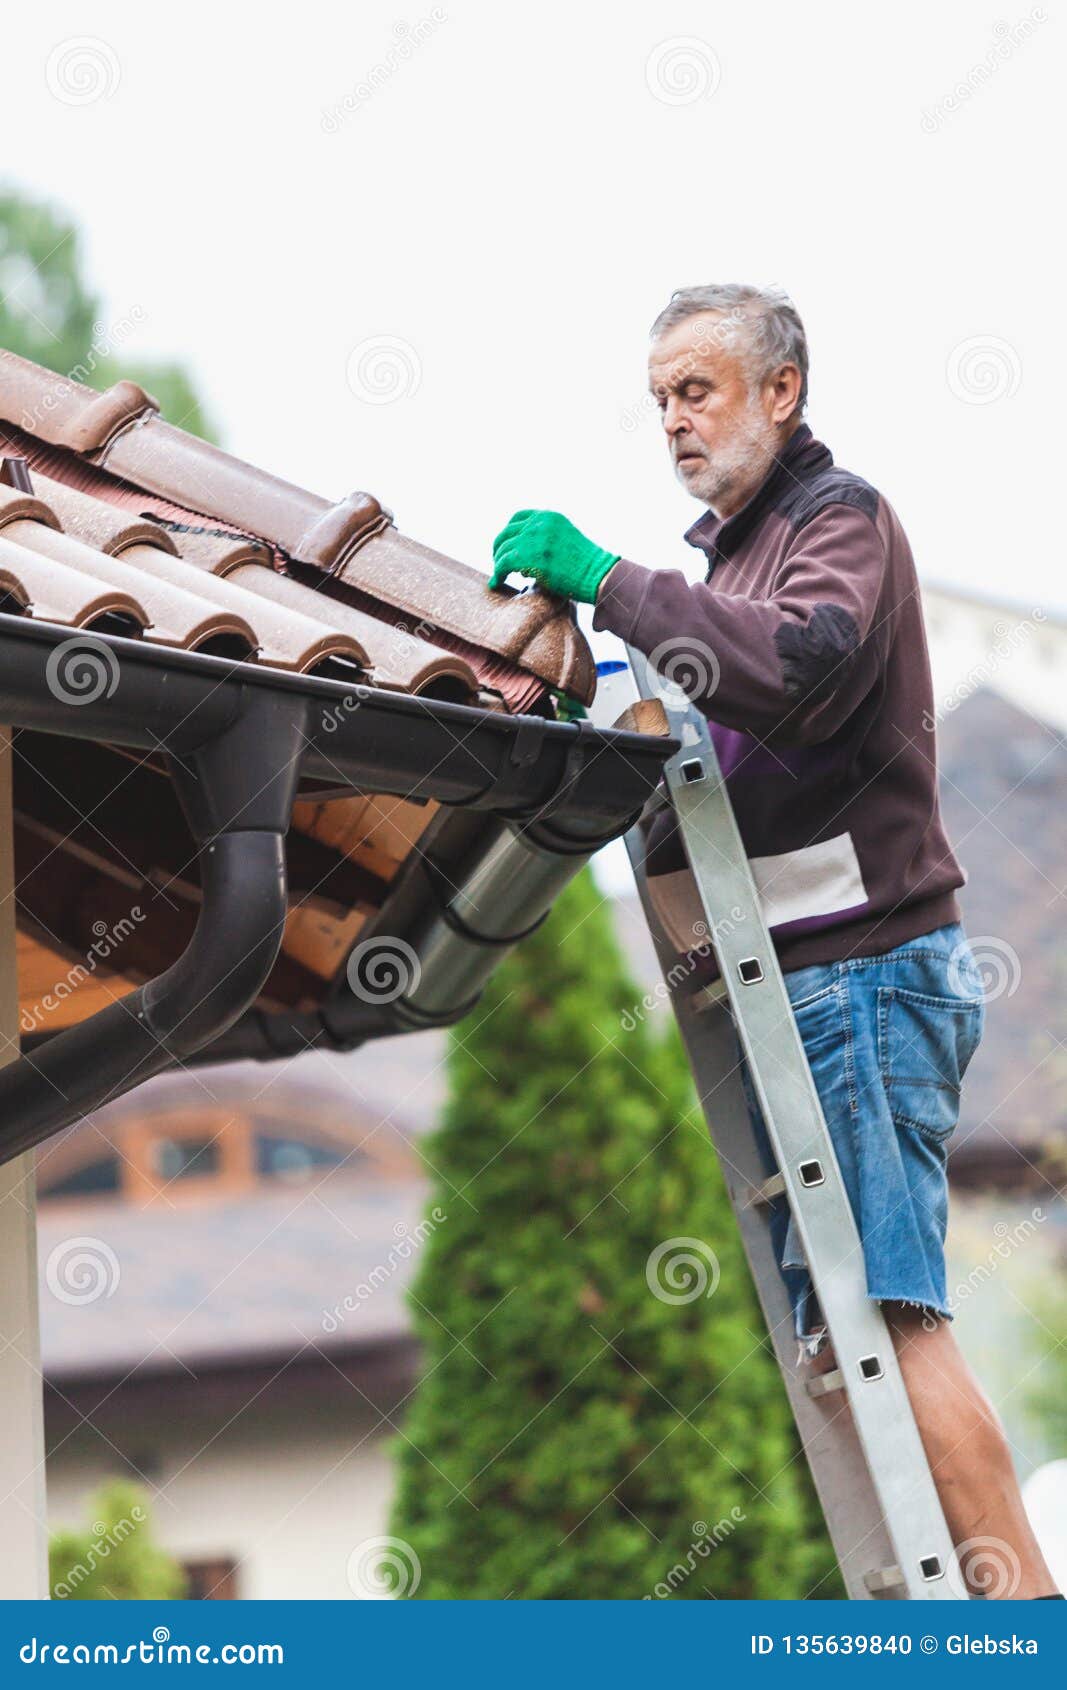 Man Repairs Tiled Roof Of House Close Up Stock Photo Image of glove, protection 135639840